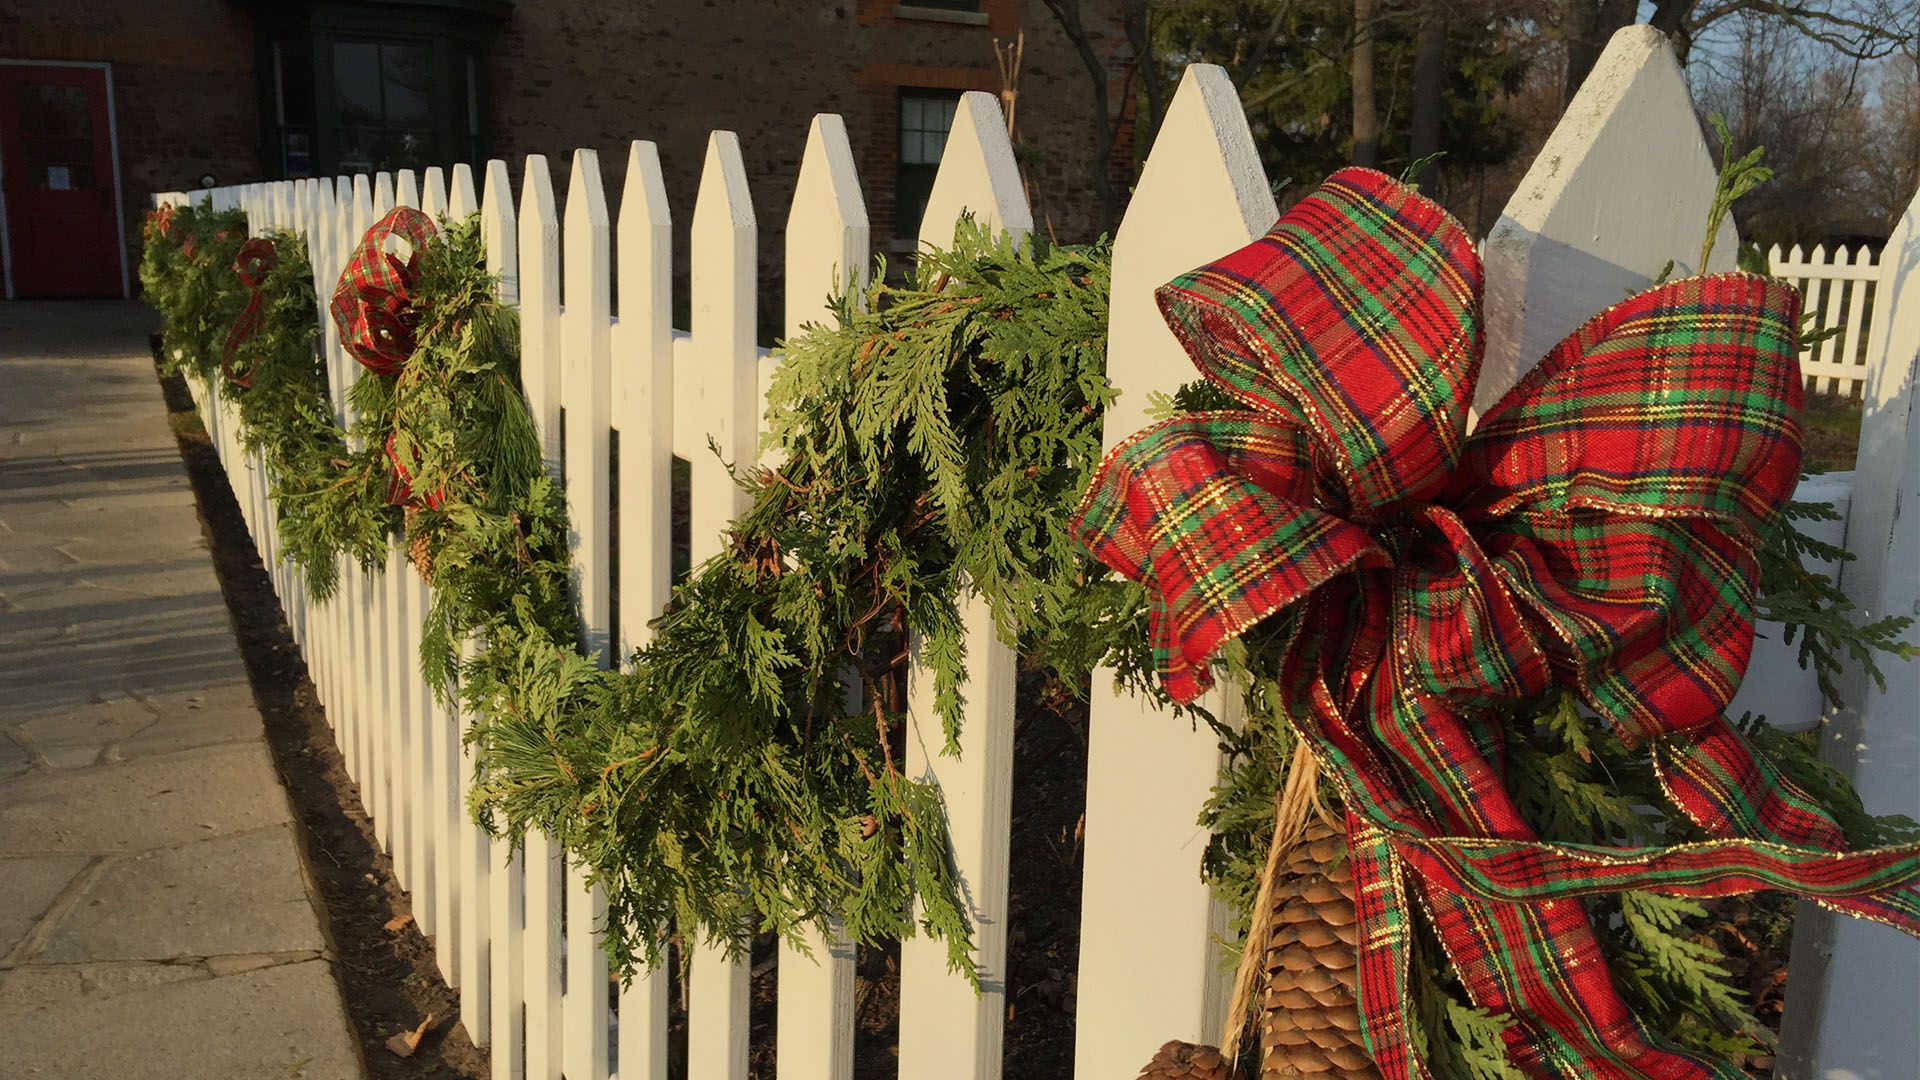 Traditions of Holidays Past Come to Life at Historic McFarland House